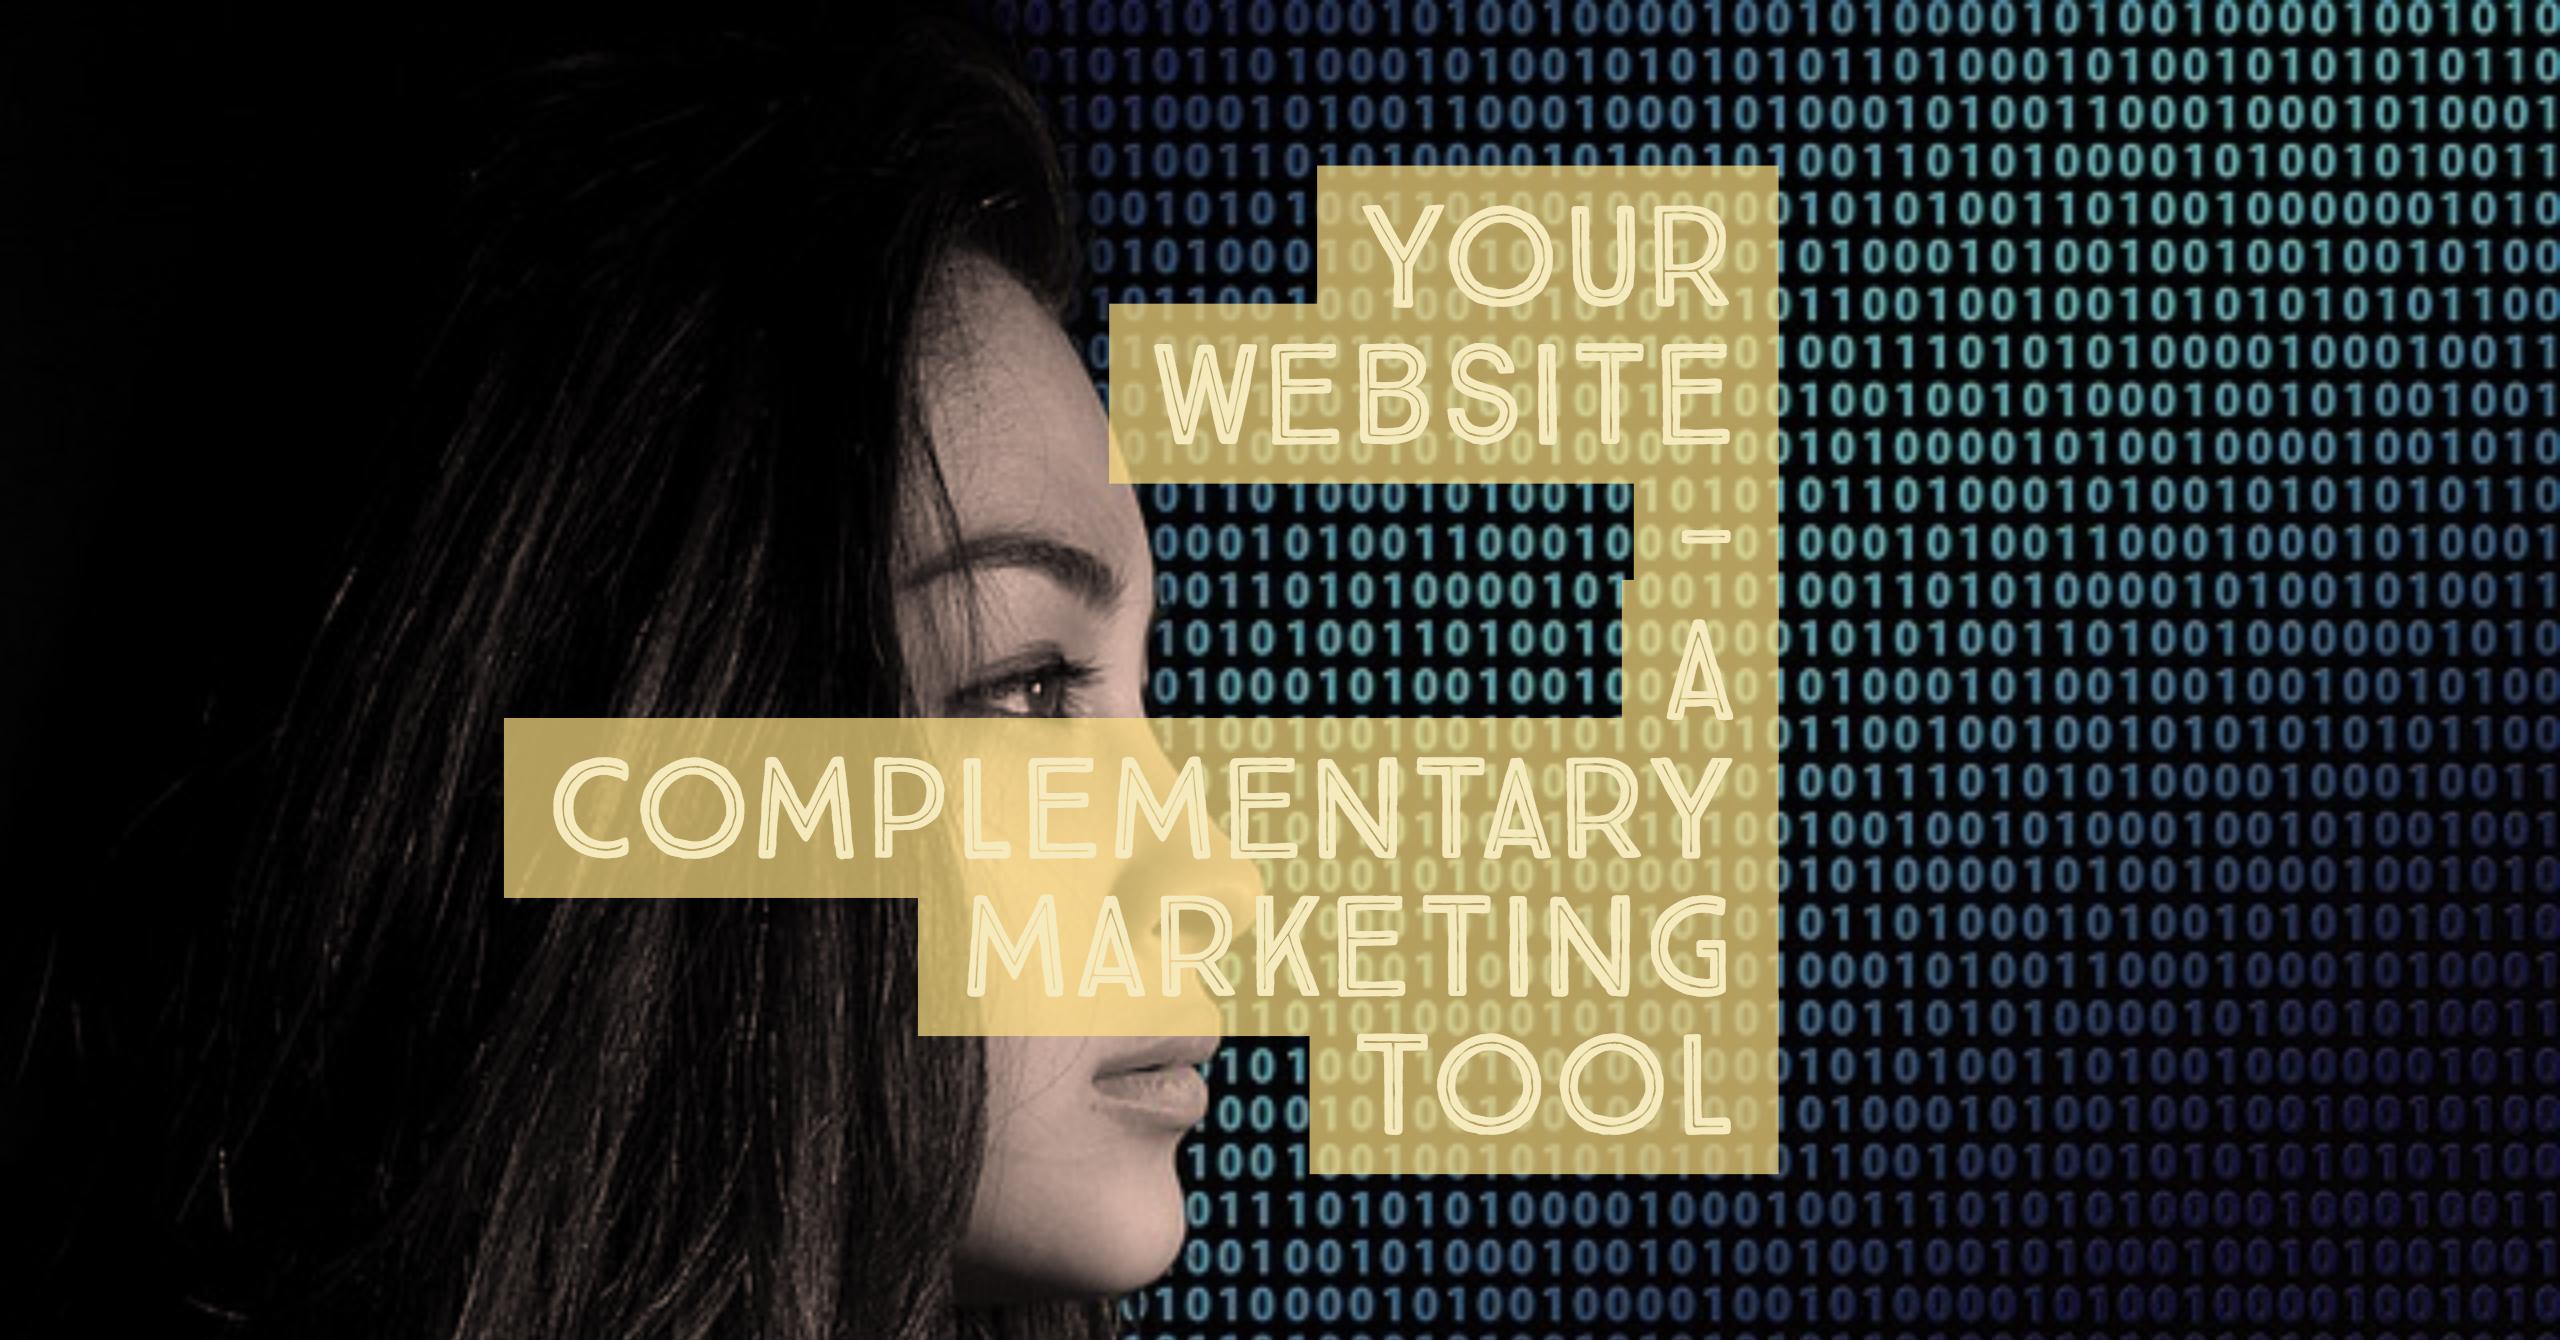 Your Website – A Complementary Marketing Tool